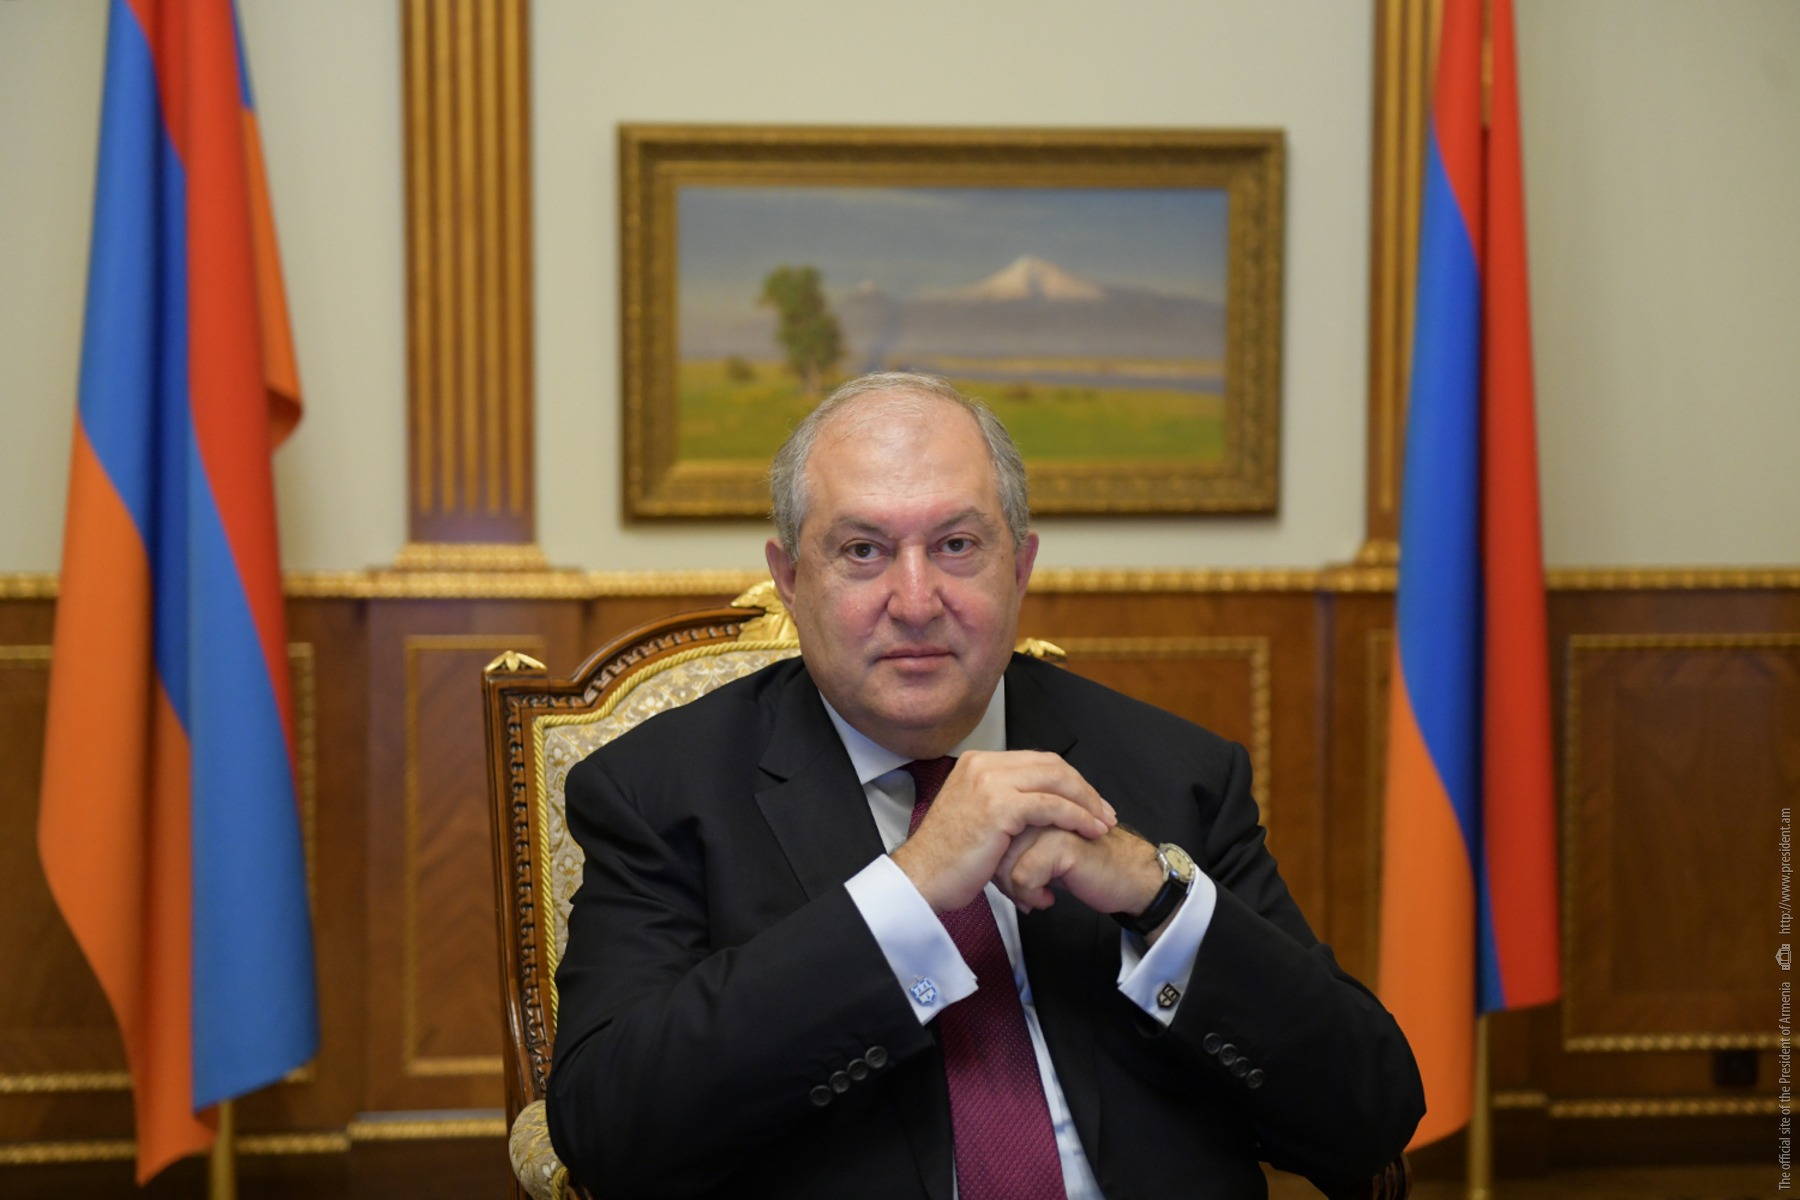 The relevant structures of the Republic of Armenia should take the strictest measures against the encroachments threatening the territorial integrity of the country, and the international structures to be most intolerant of Azerbaijan’s actions